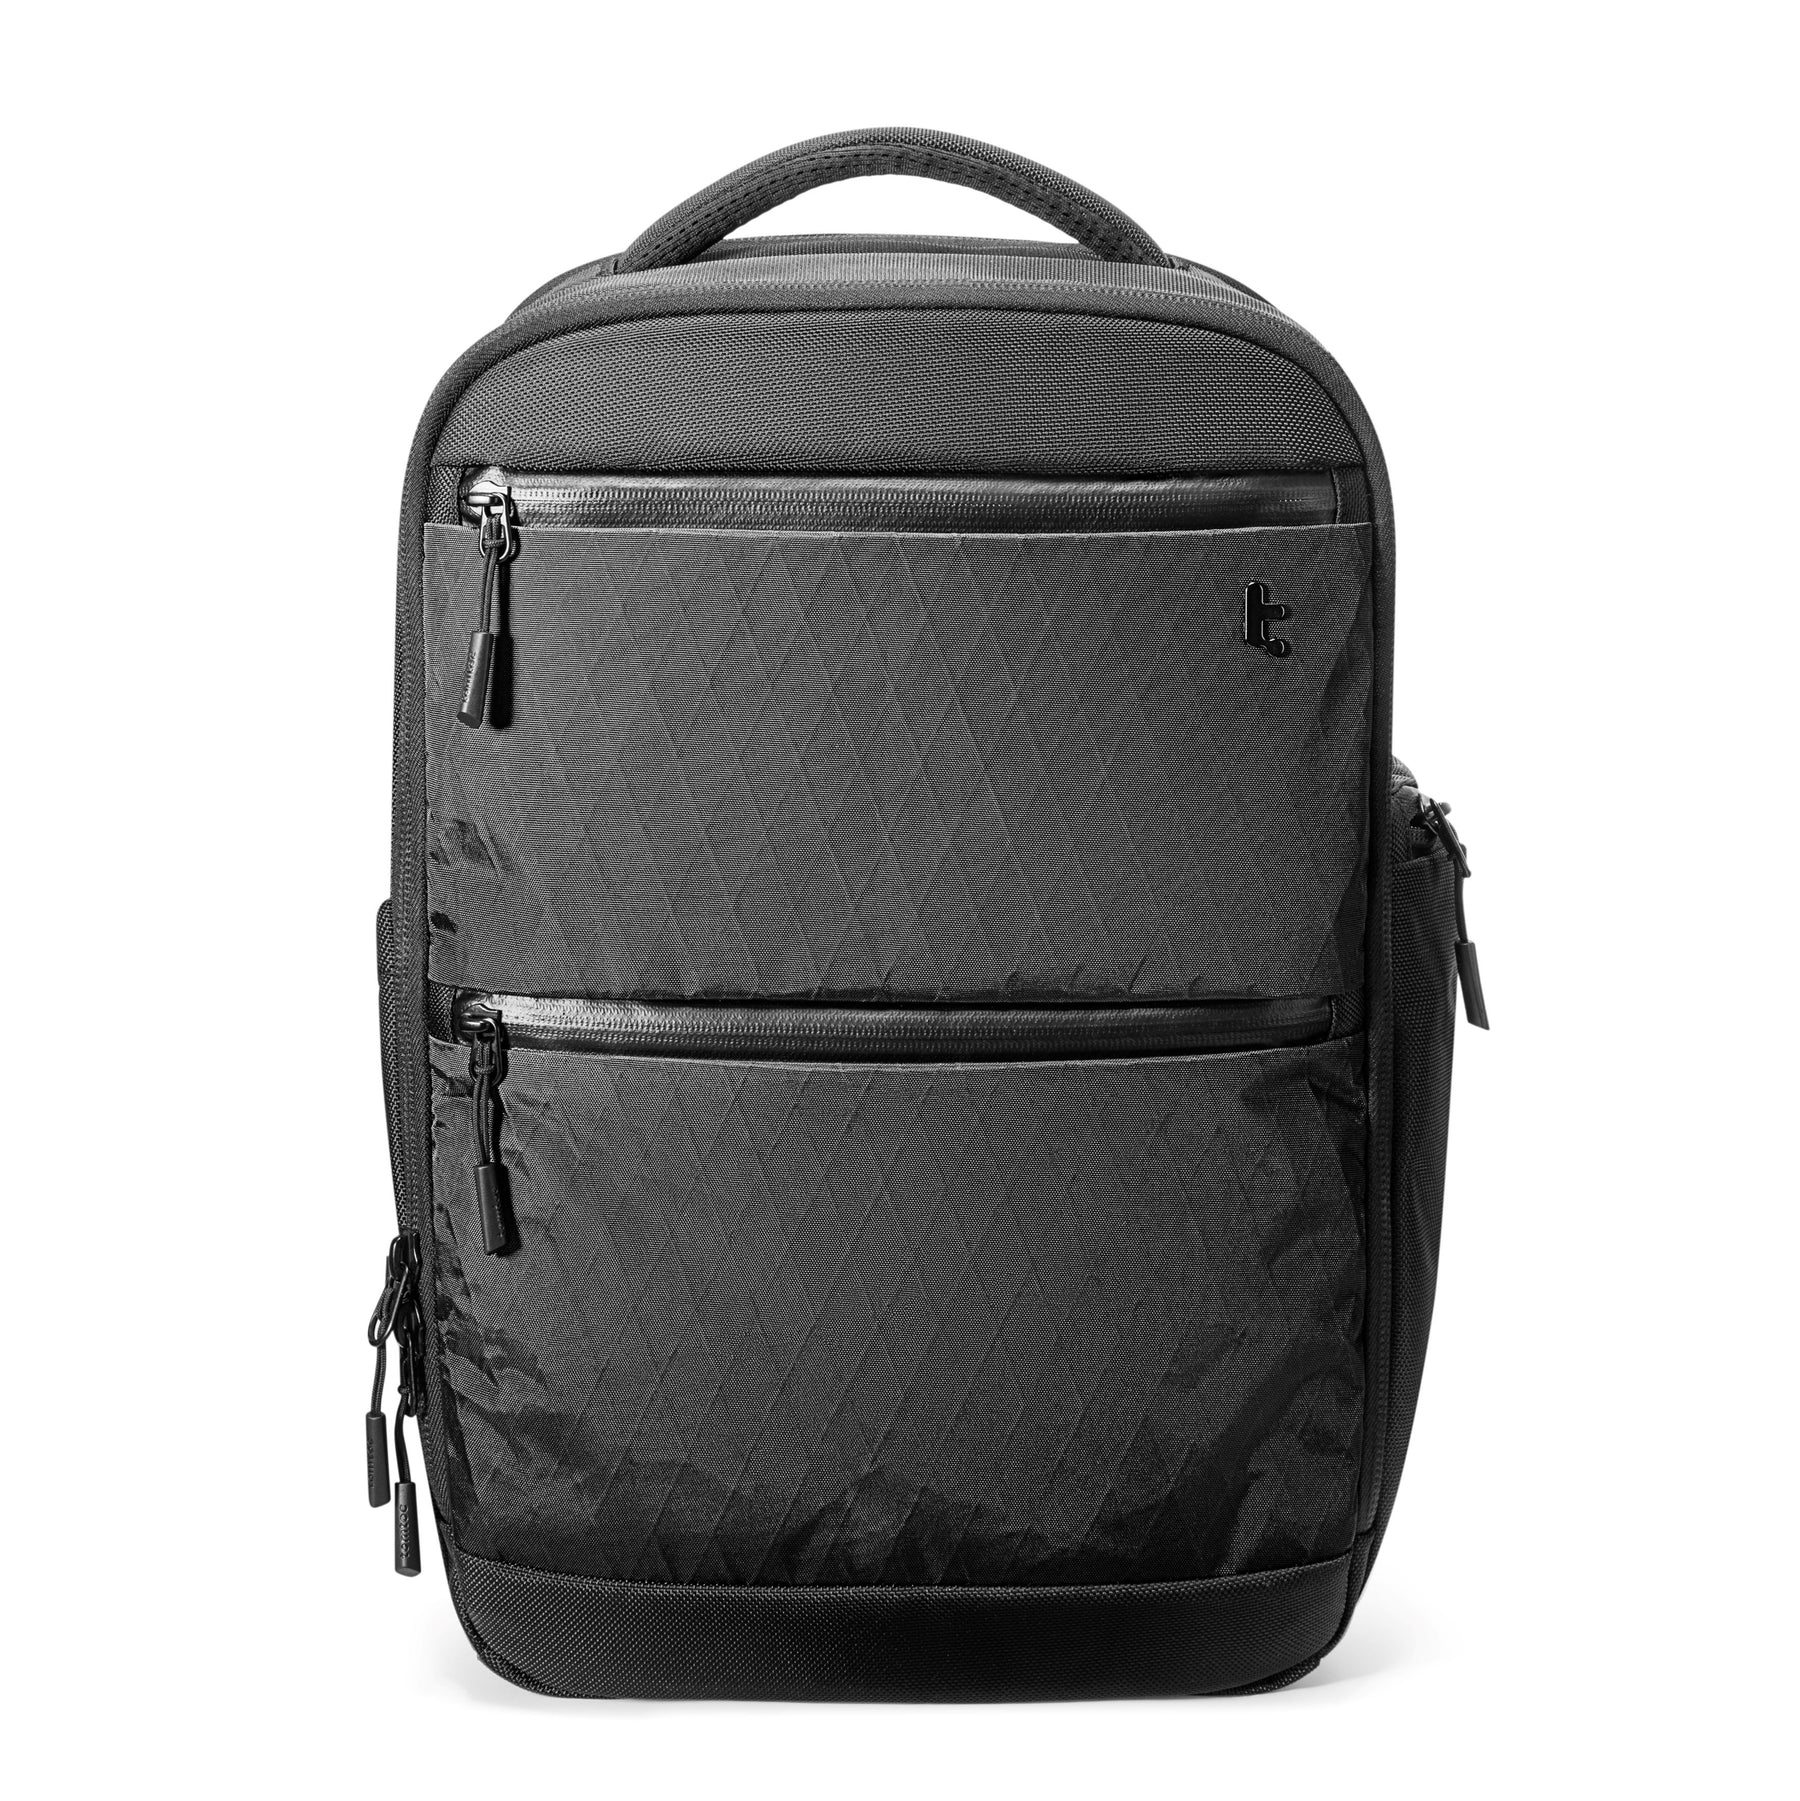 TechPack-T73 X-Pac Laptop Backpack Black 15.6-inch [30L]